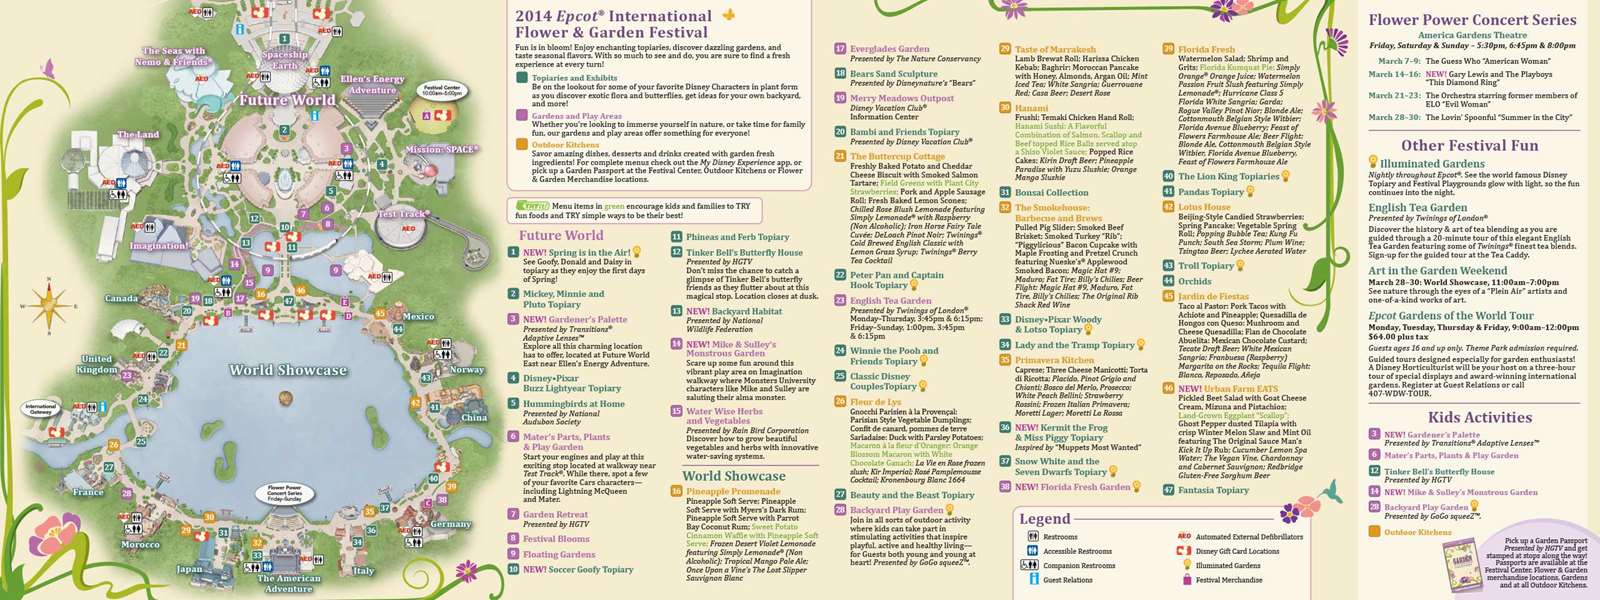 2014 epcot flower and garden festival guide map - photo 1 of 2